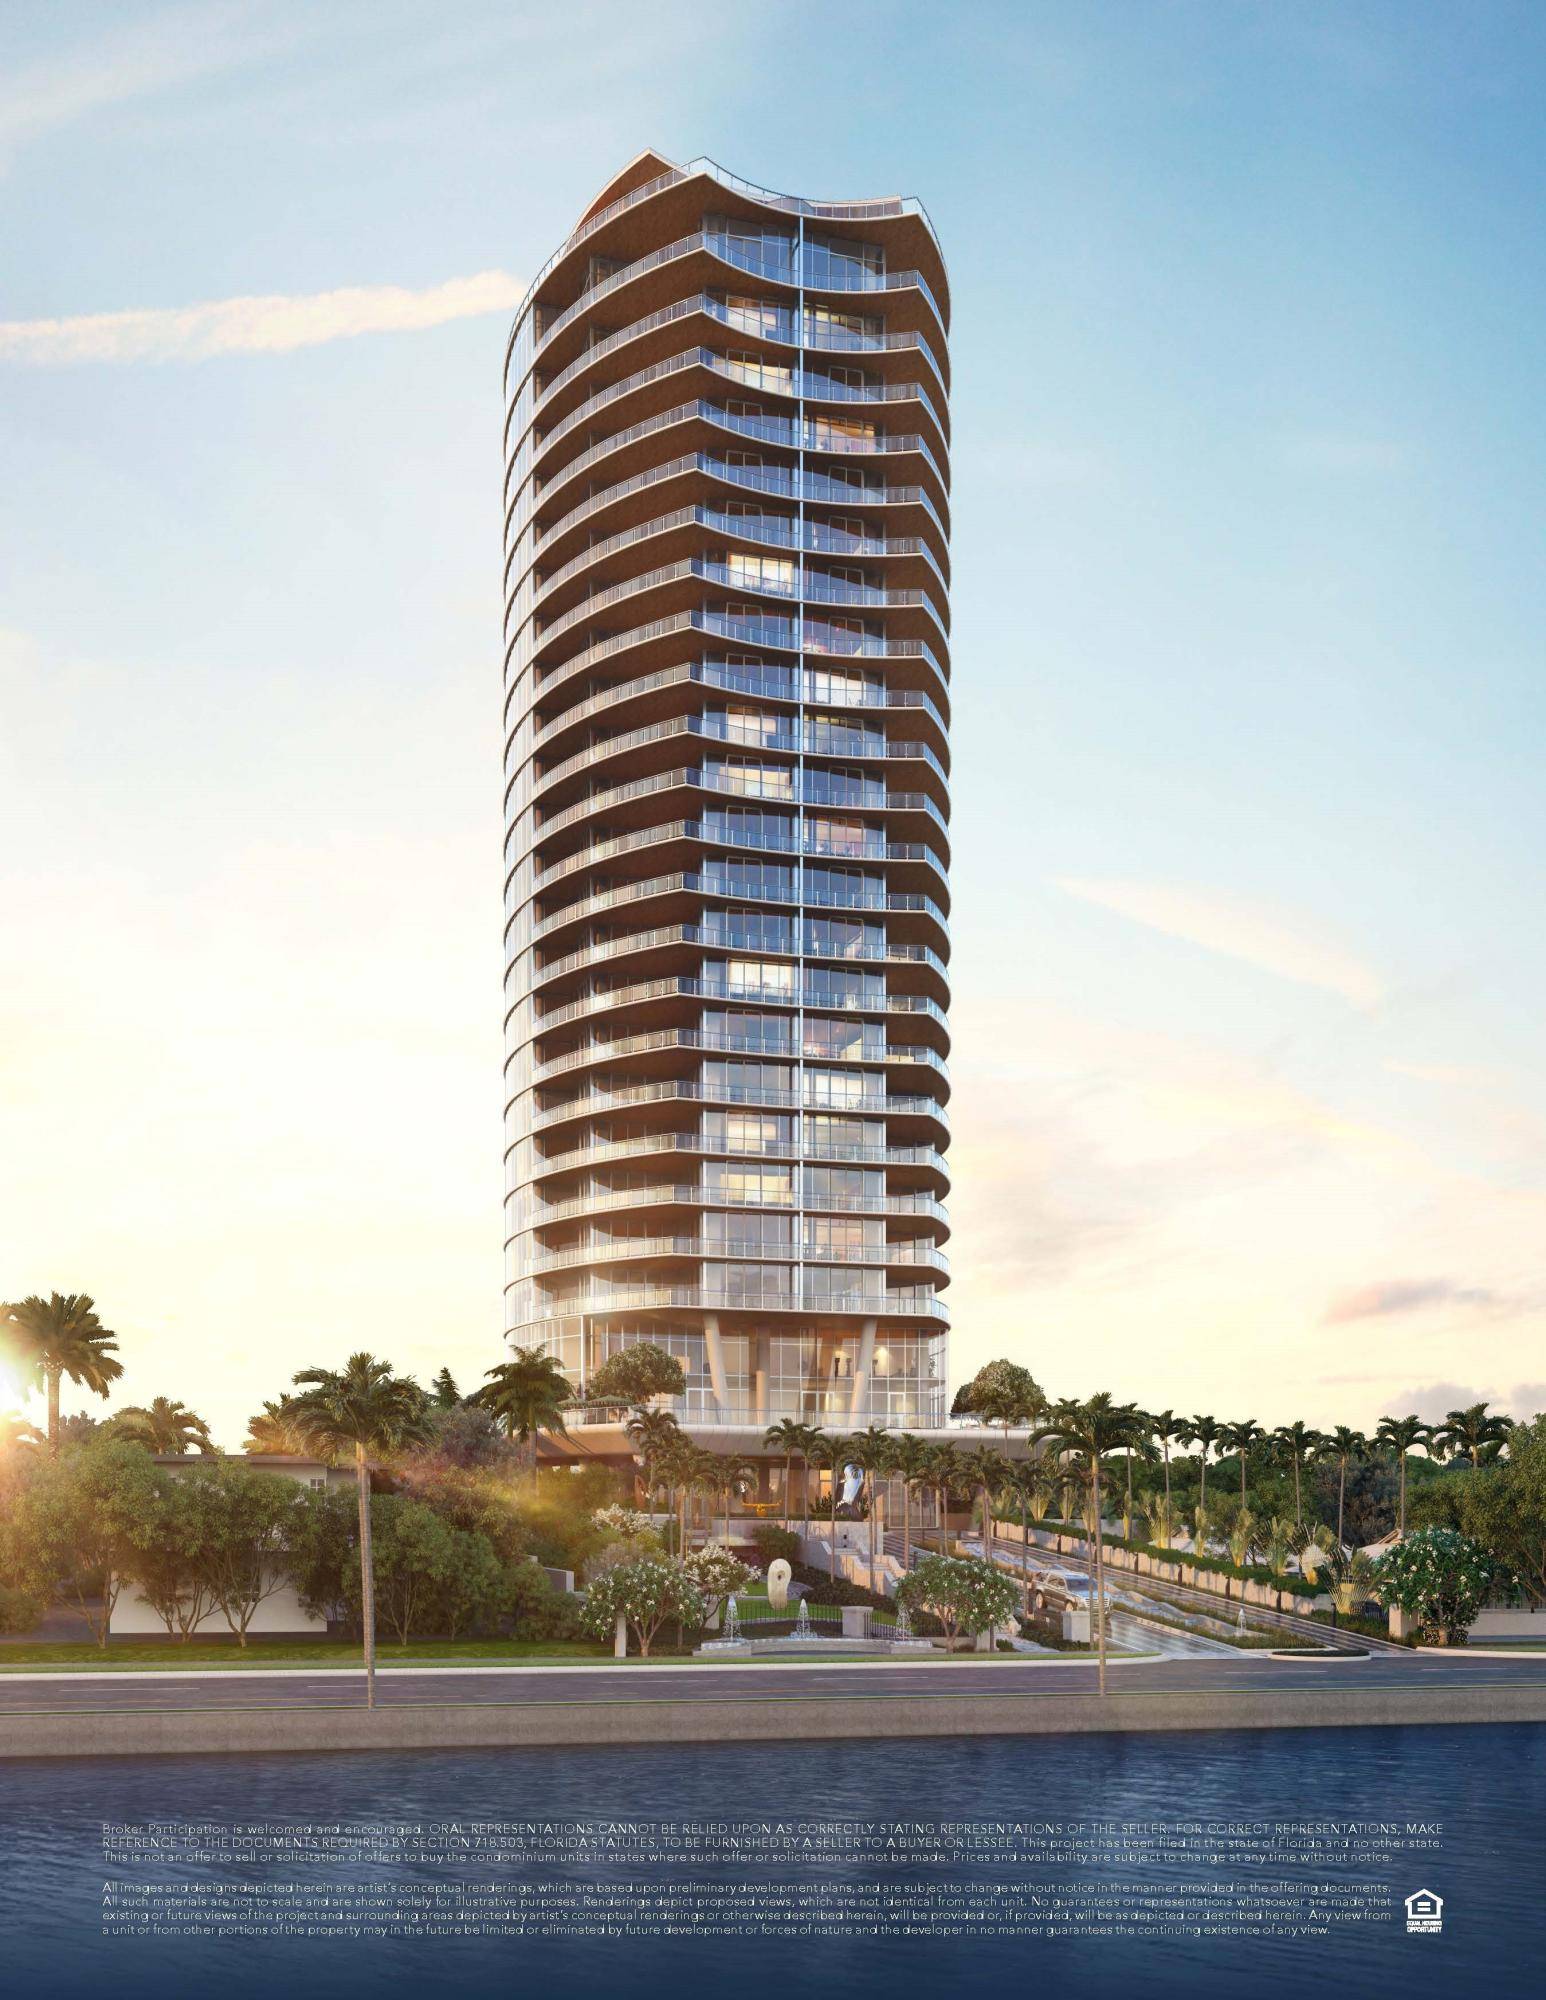 New Construction. Overlooking Palm Beach from South Flagler Drive, this 24 story tower enjoys sweeping views of Worth Avenue, the Intracoastal Waterway and the Atlantic Ocean.